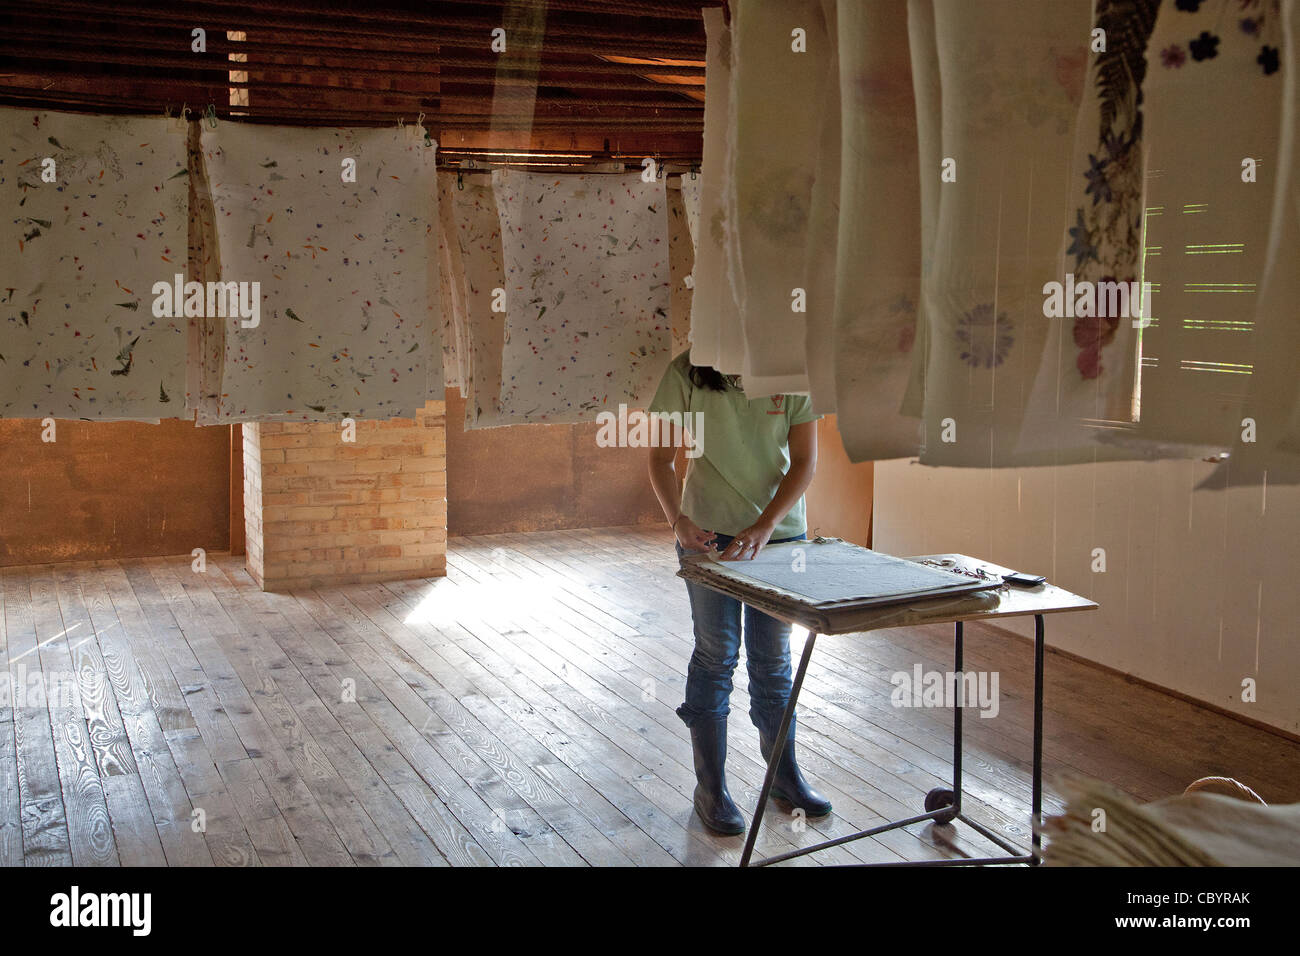 DRYING THE SHEETS OF PAPER, RICHARD DE BAS PAPER MILL, HISTORICAL PAPER  MUSEUM, AMBERT, PUY-DE-DOME, FRANCE Stock Photo - Alamy